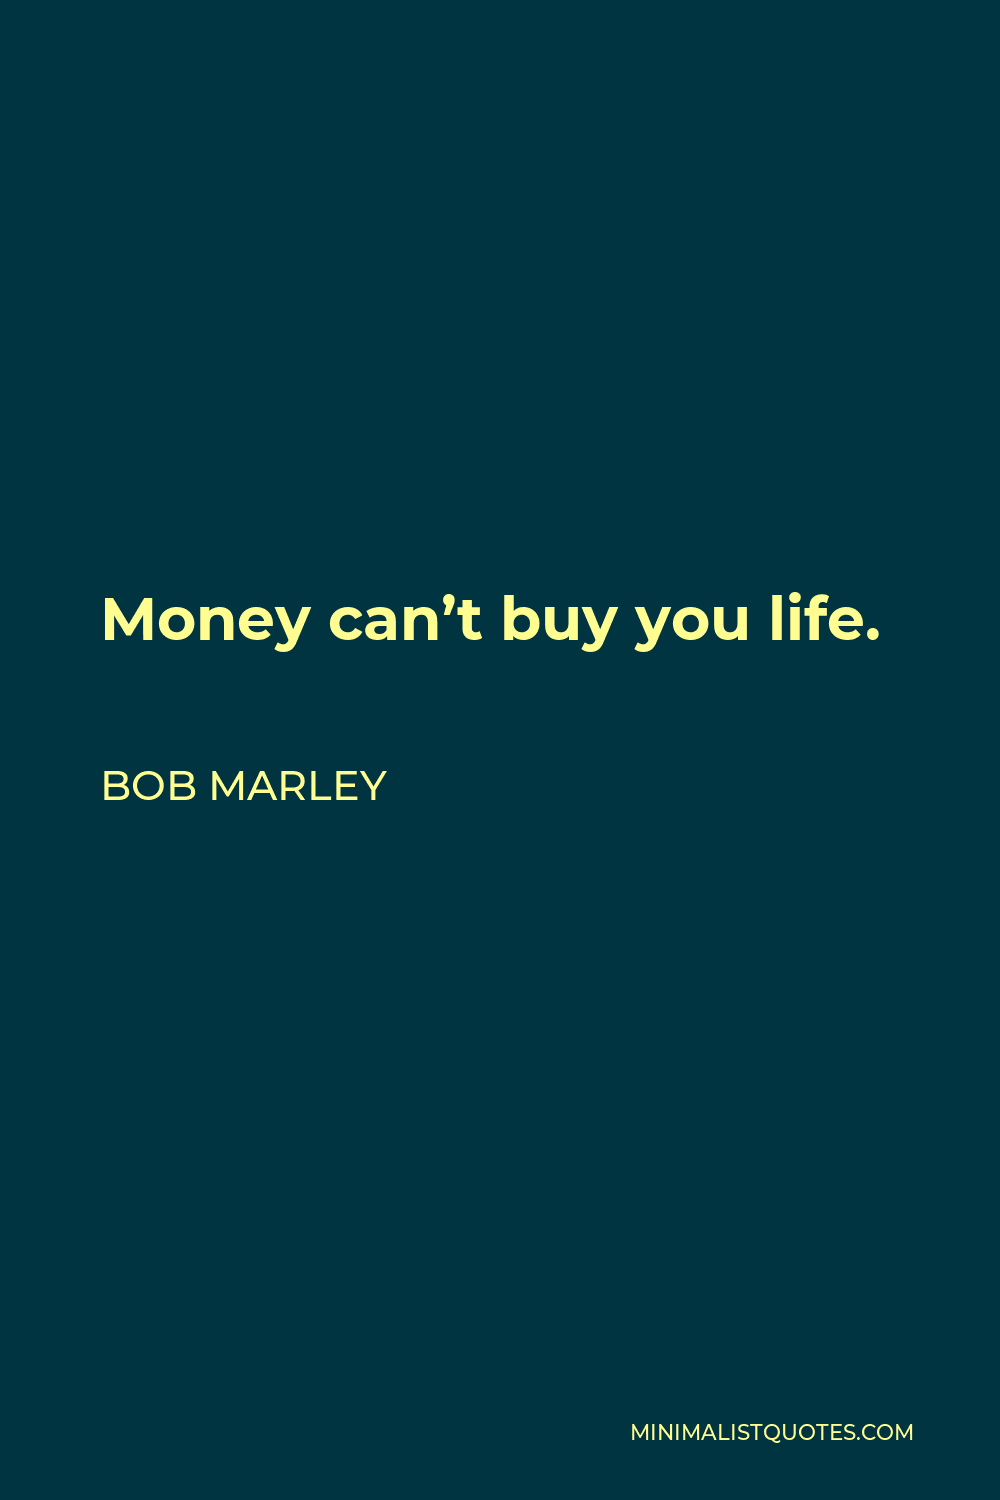 Bob Marley Quote - Money can’t buy you life.